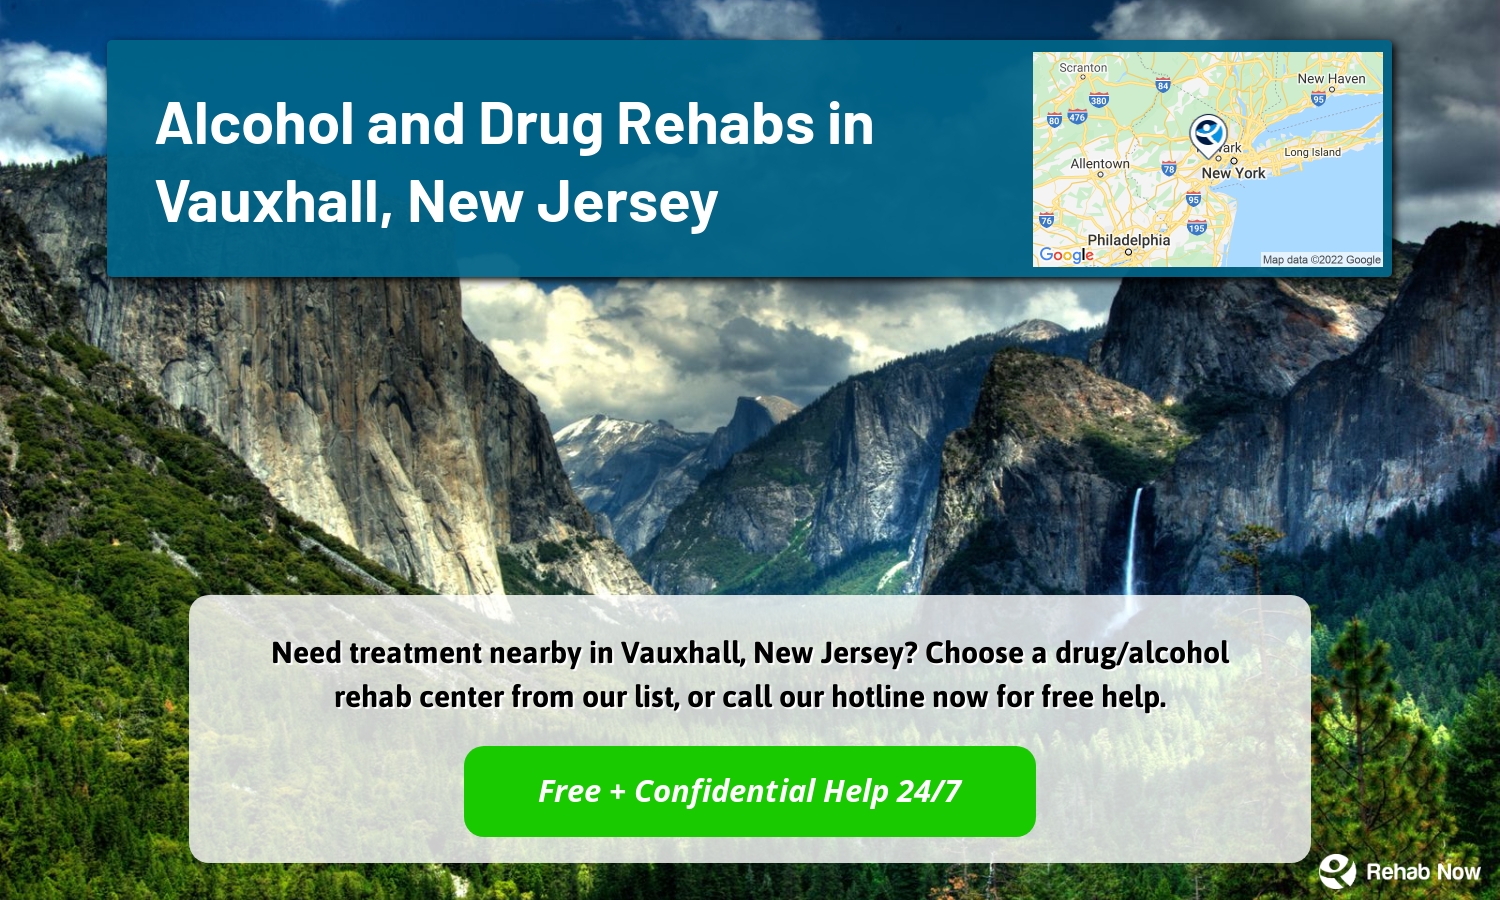 Need treatment nearby in Vauxhall, New Jersey? Choose a drug/alcohol rehab center from our list, or call our hotline now for free help.